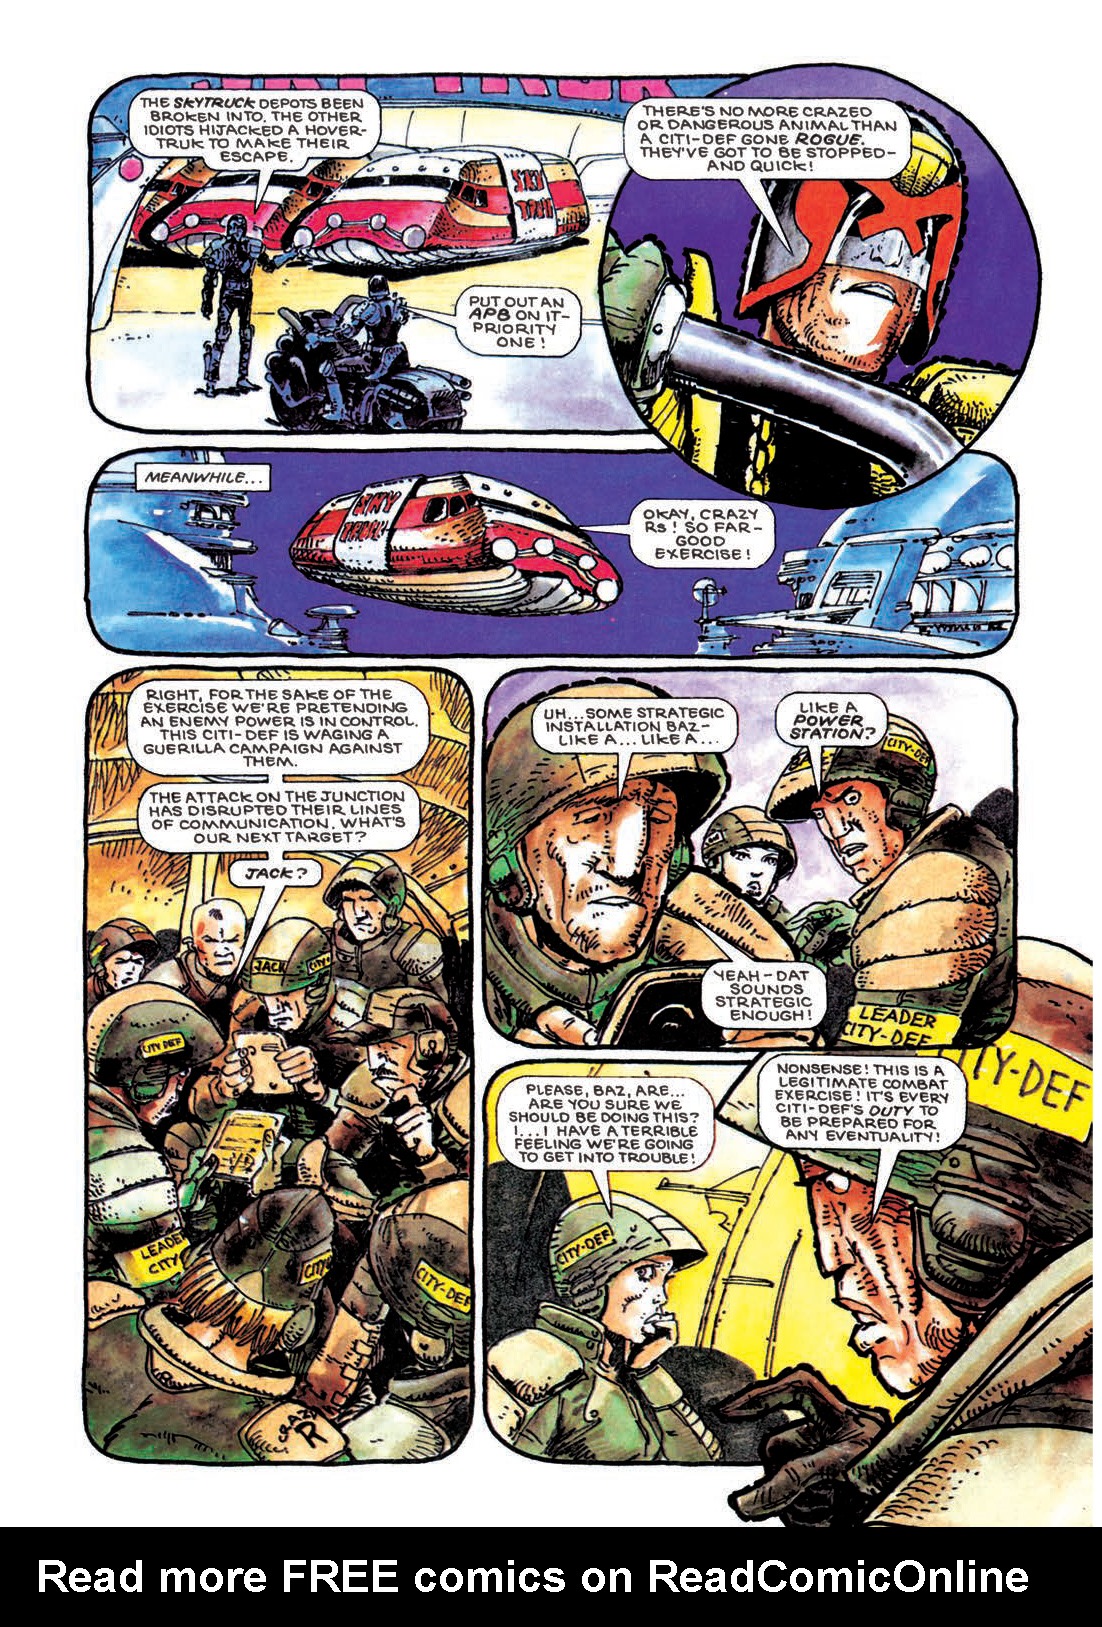 Read online Judge Dredd: The Restricted Files comic -  Issue # TPB 2 - 36